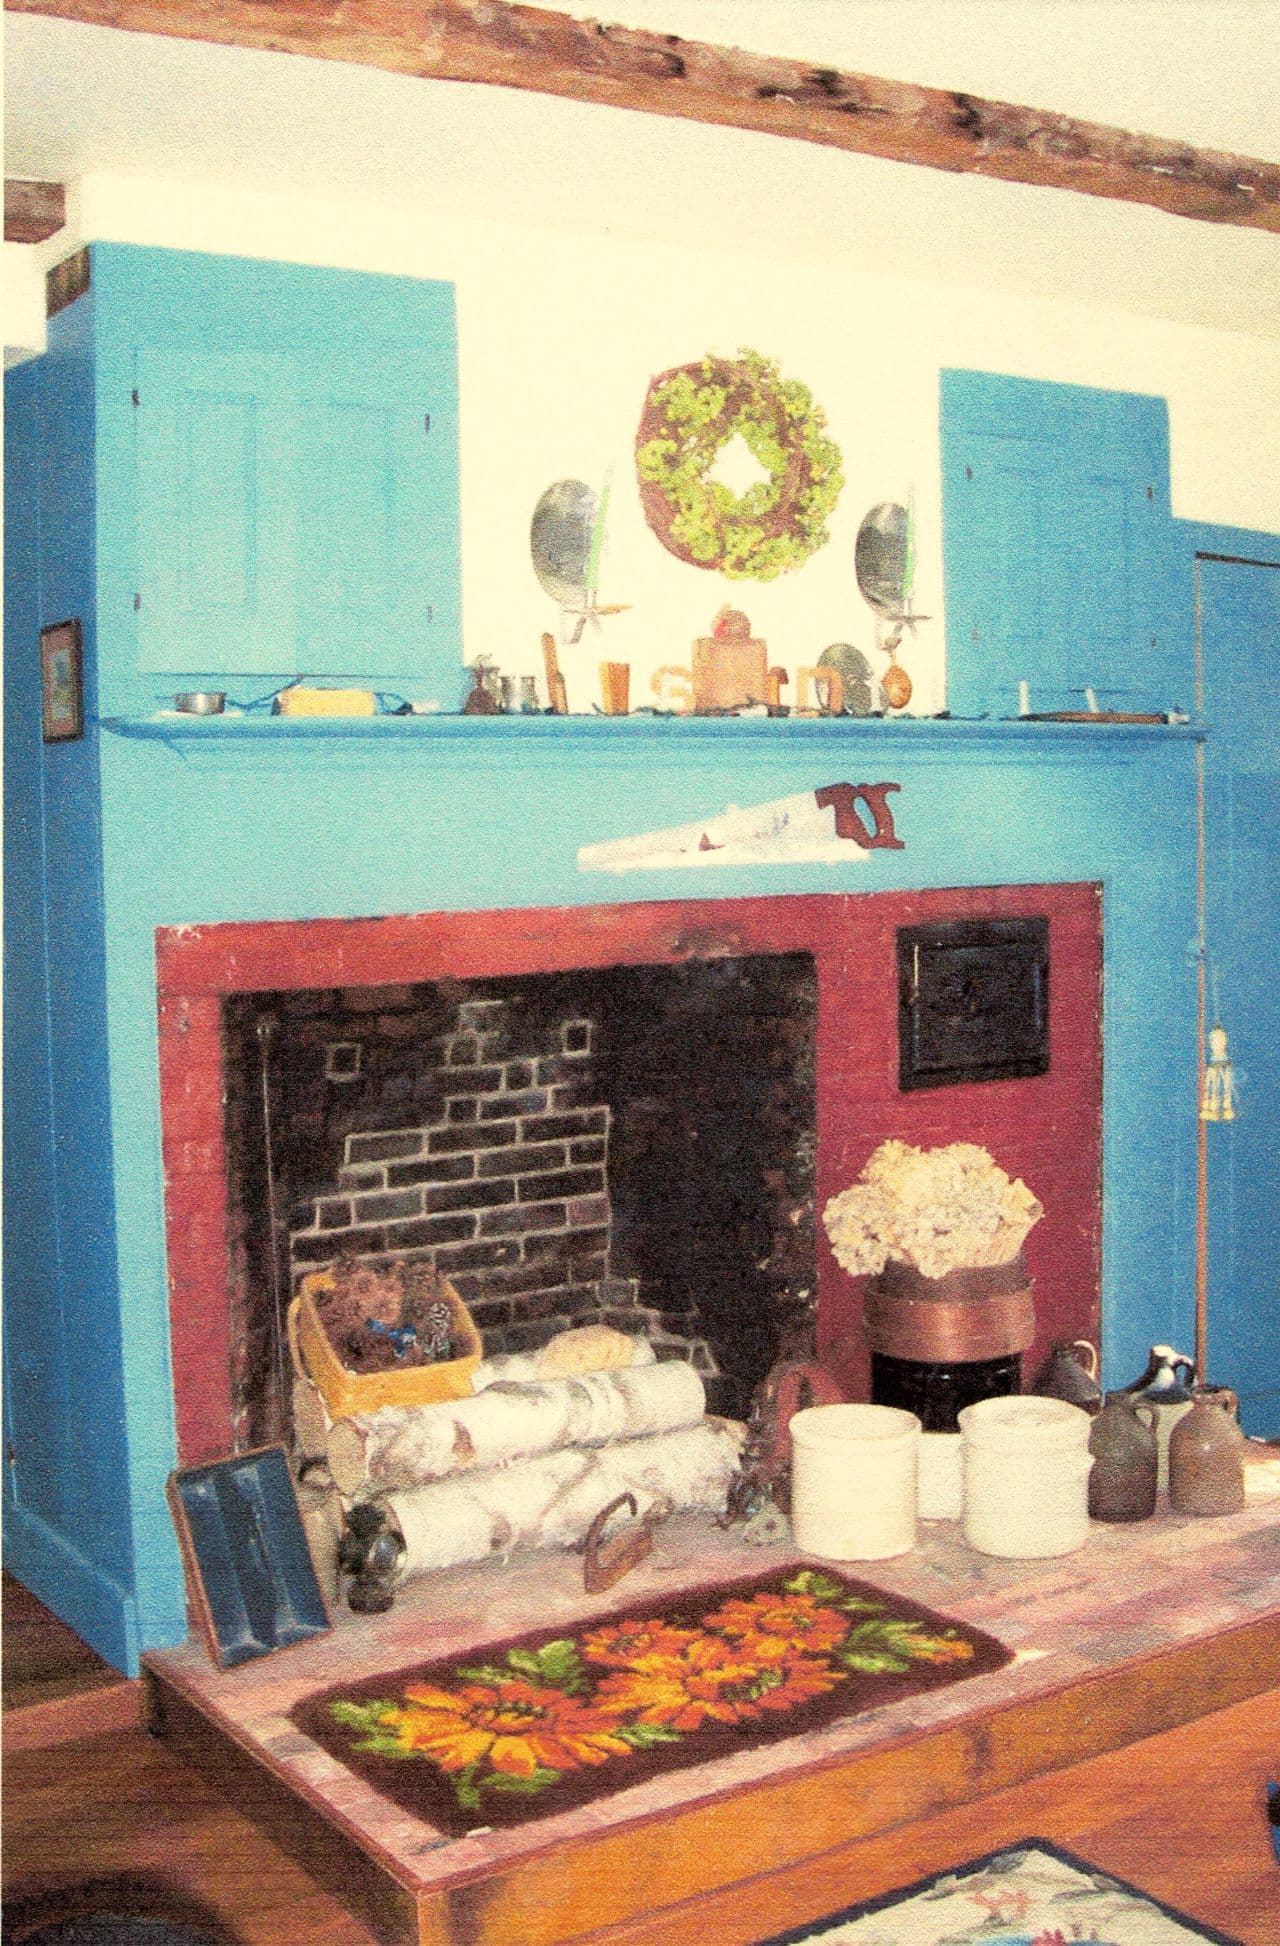 Midwife Martha Ballard attended an autopsy in this kitchen. (Jan Doerr/Courtesy)